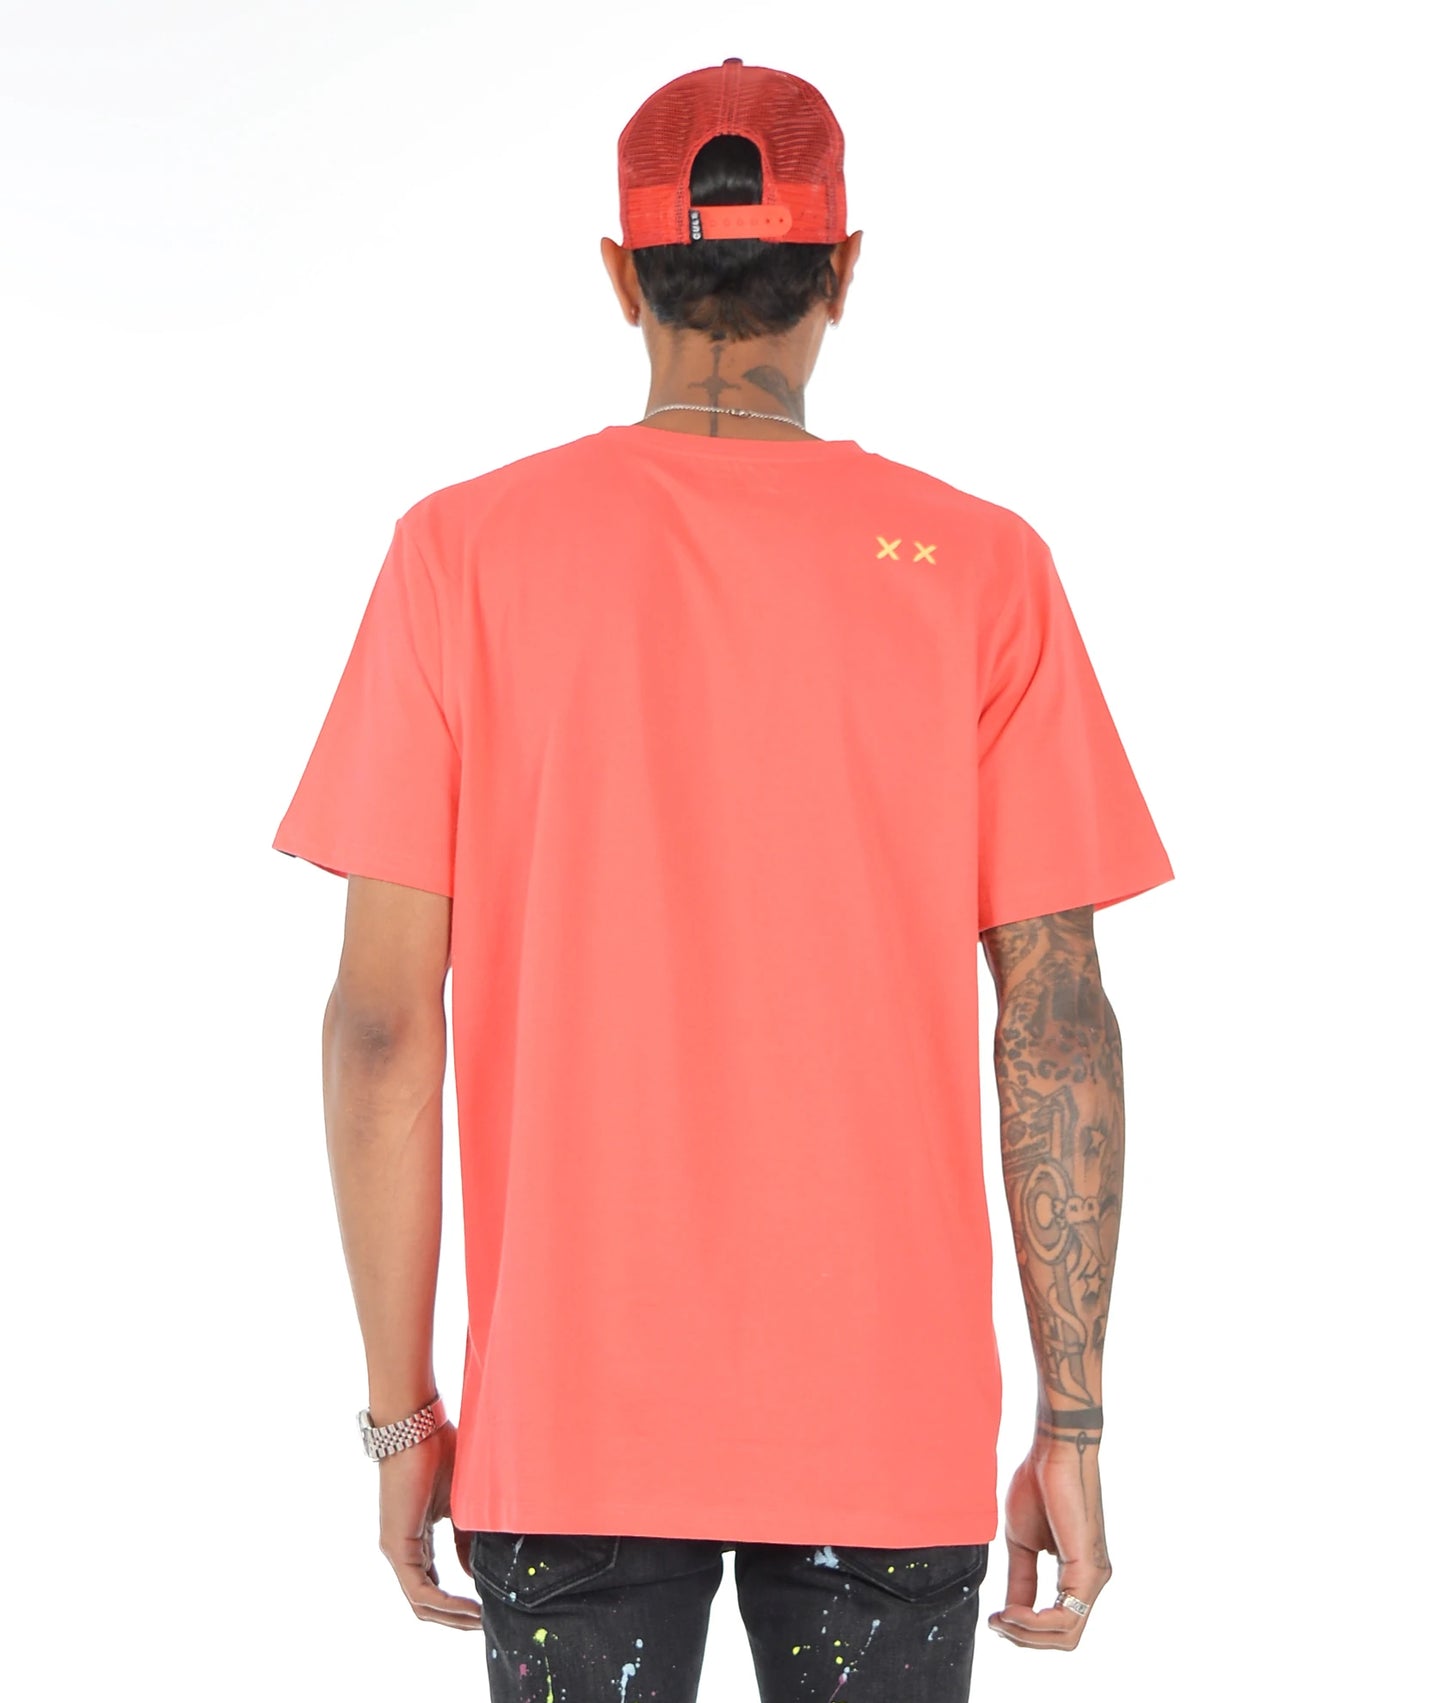 T-SHIRT BRUSHED SHIMUCHAN LOGO SHORT SLEEVE CREW NECK TEE IN CORAL